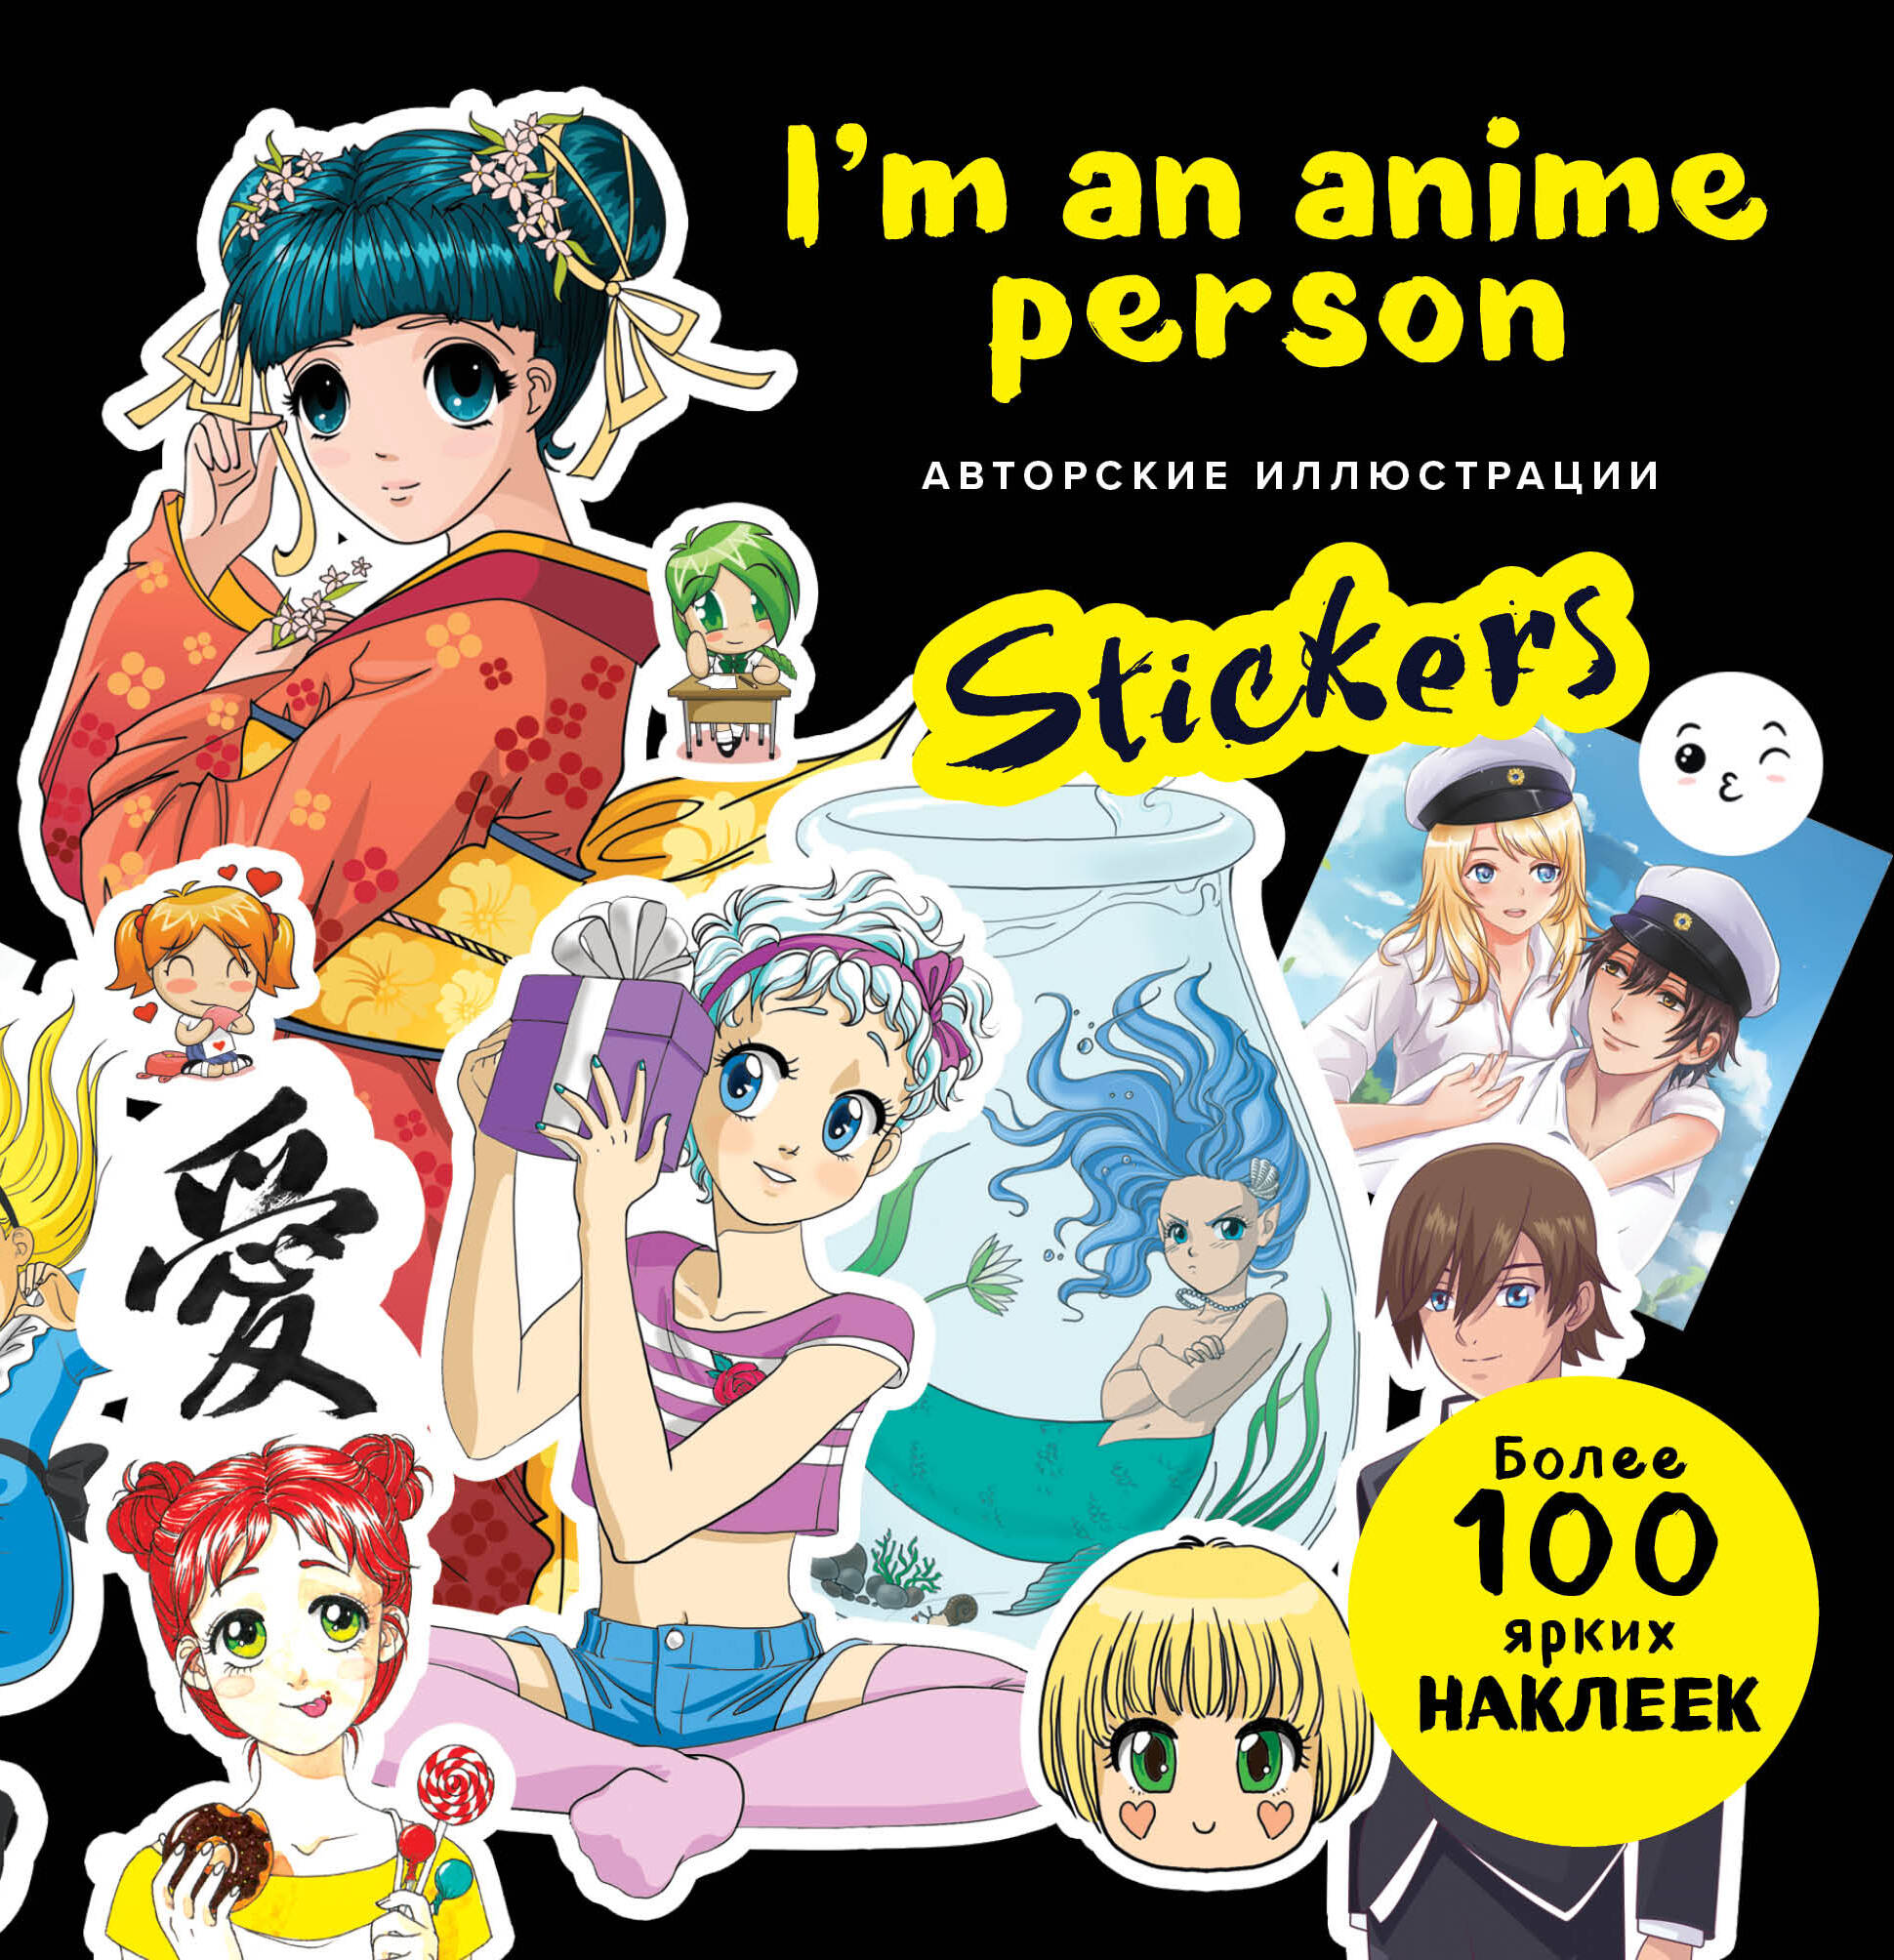 Im an anime person. Stickers.  100  !